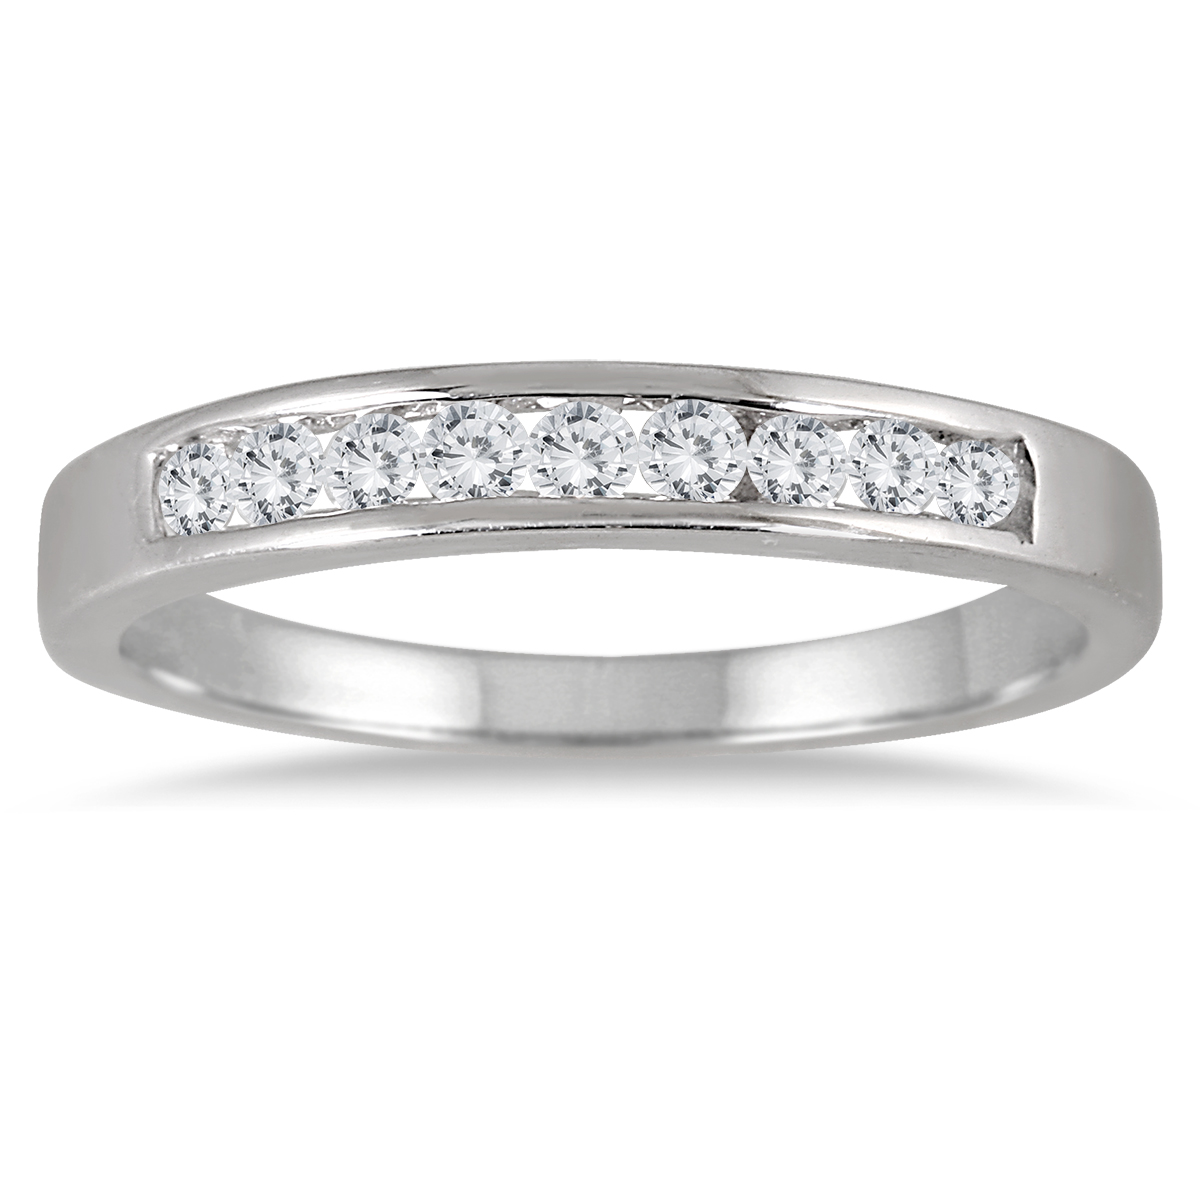 1/4 Carat TW Channel Set Natural Diamond Band in .925 Sterling Silver